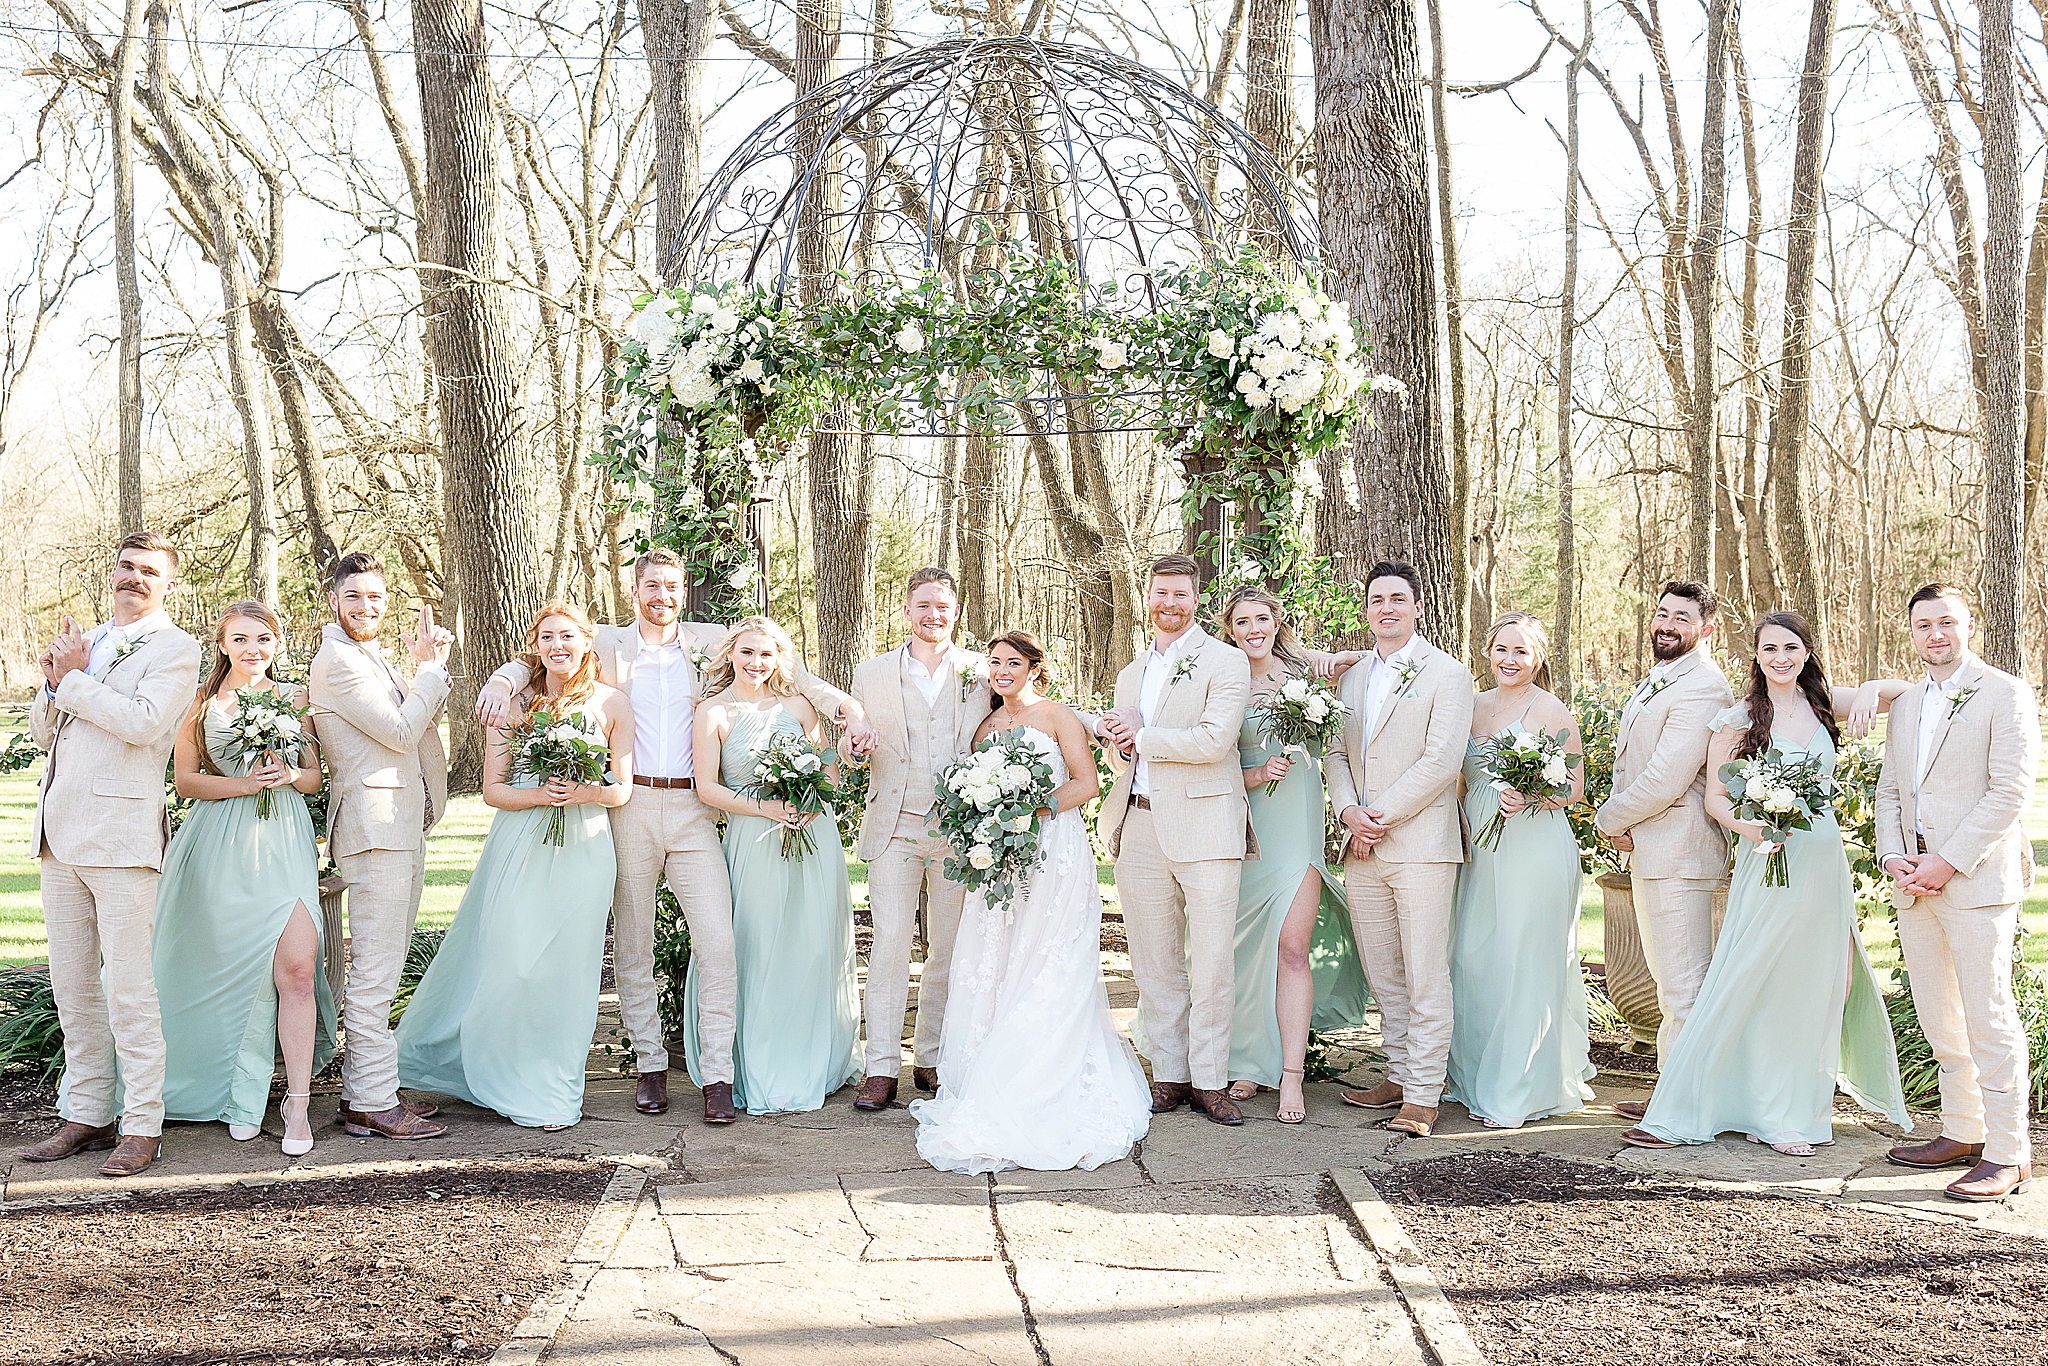 wedding party poses in teal and tan outfits